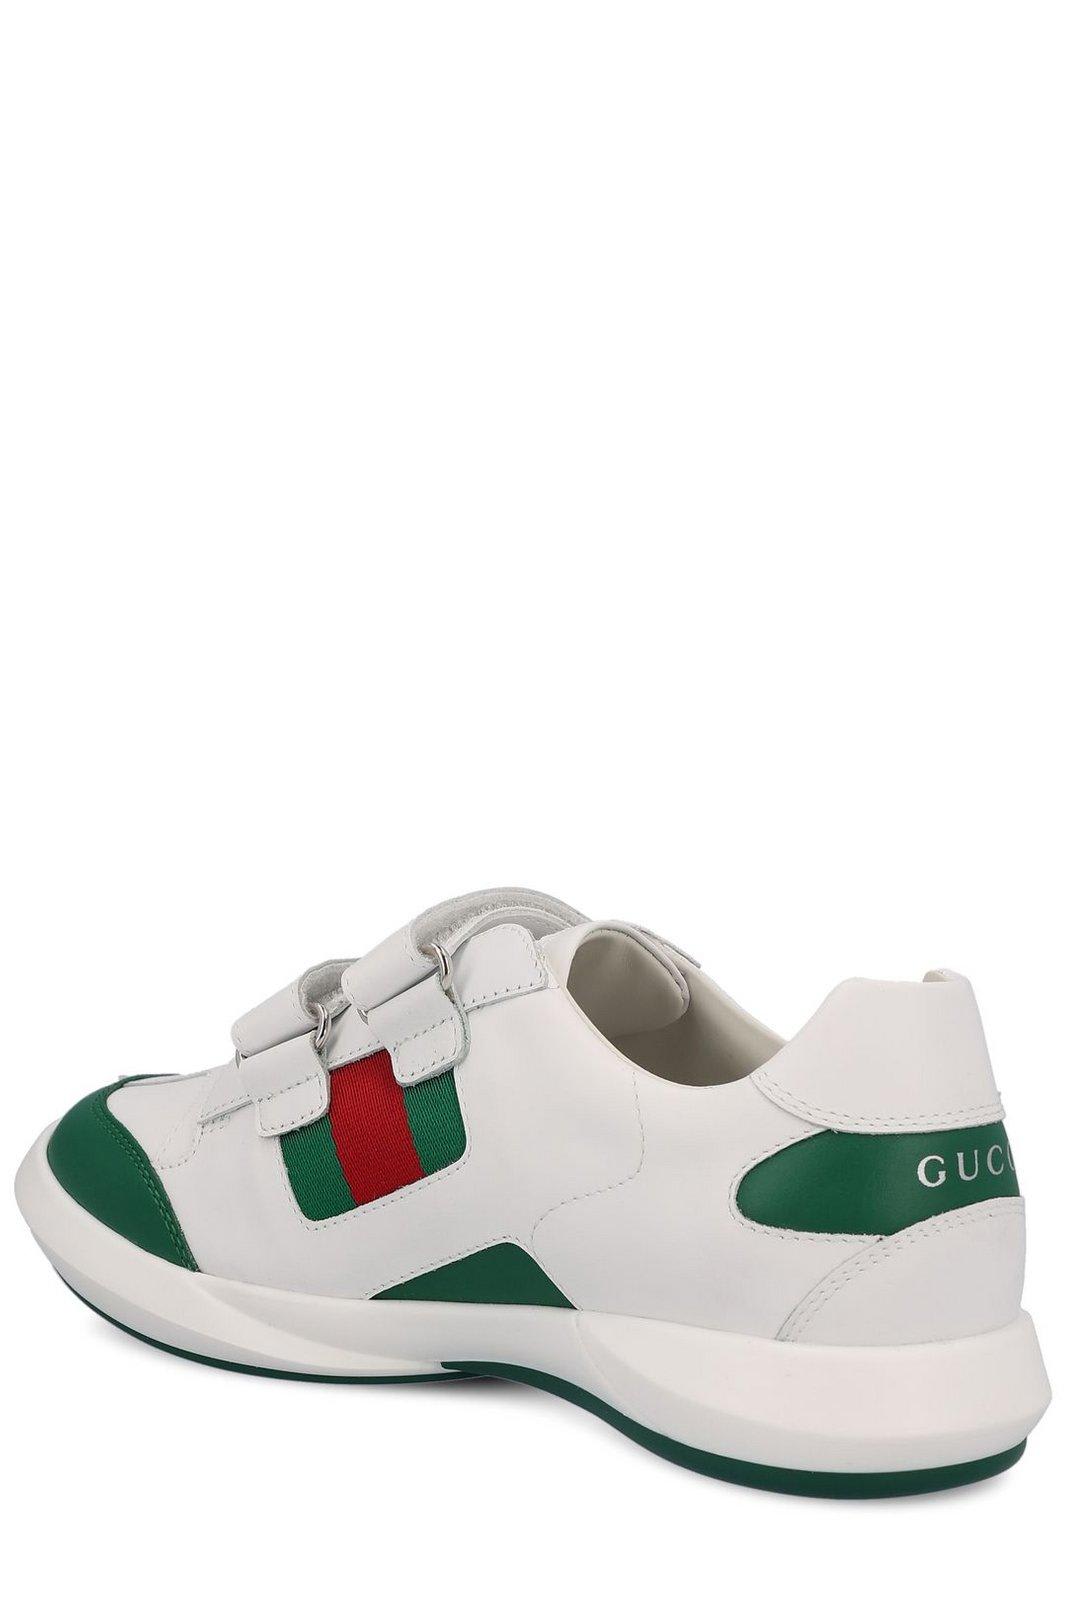 Shop Gucci Logo Printed Round Toe Sneakers In White